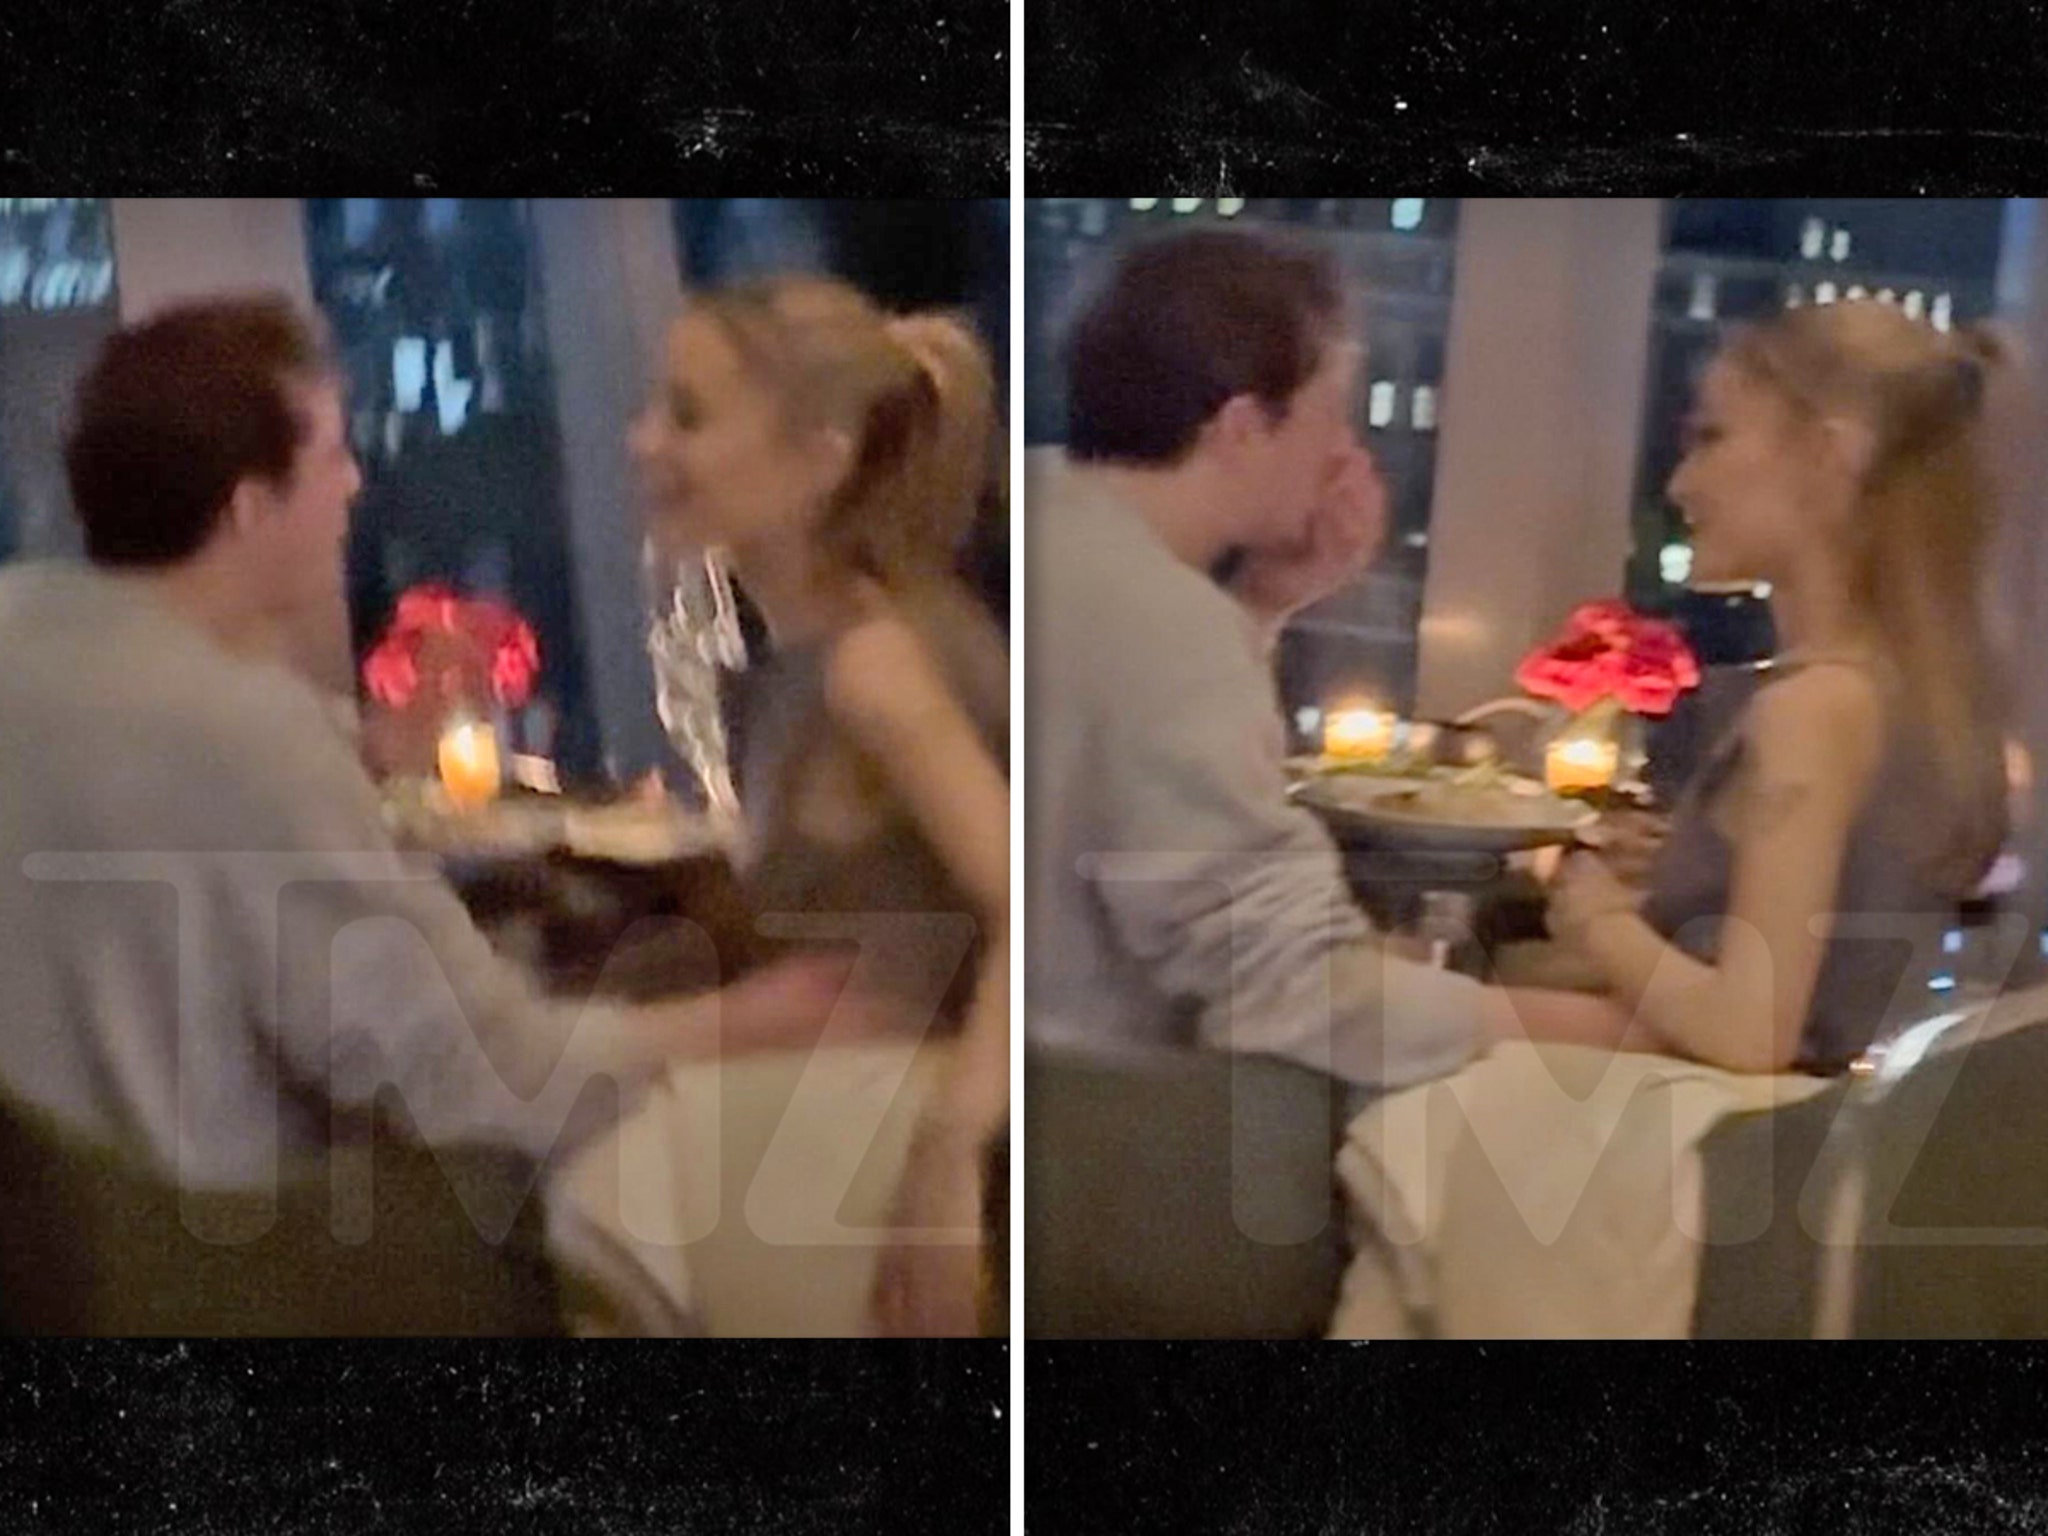 Ariana Grande Wines & Dines with Boyfriend Ethan Slater in NYC